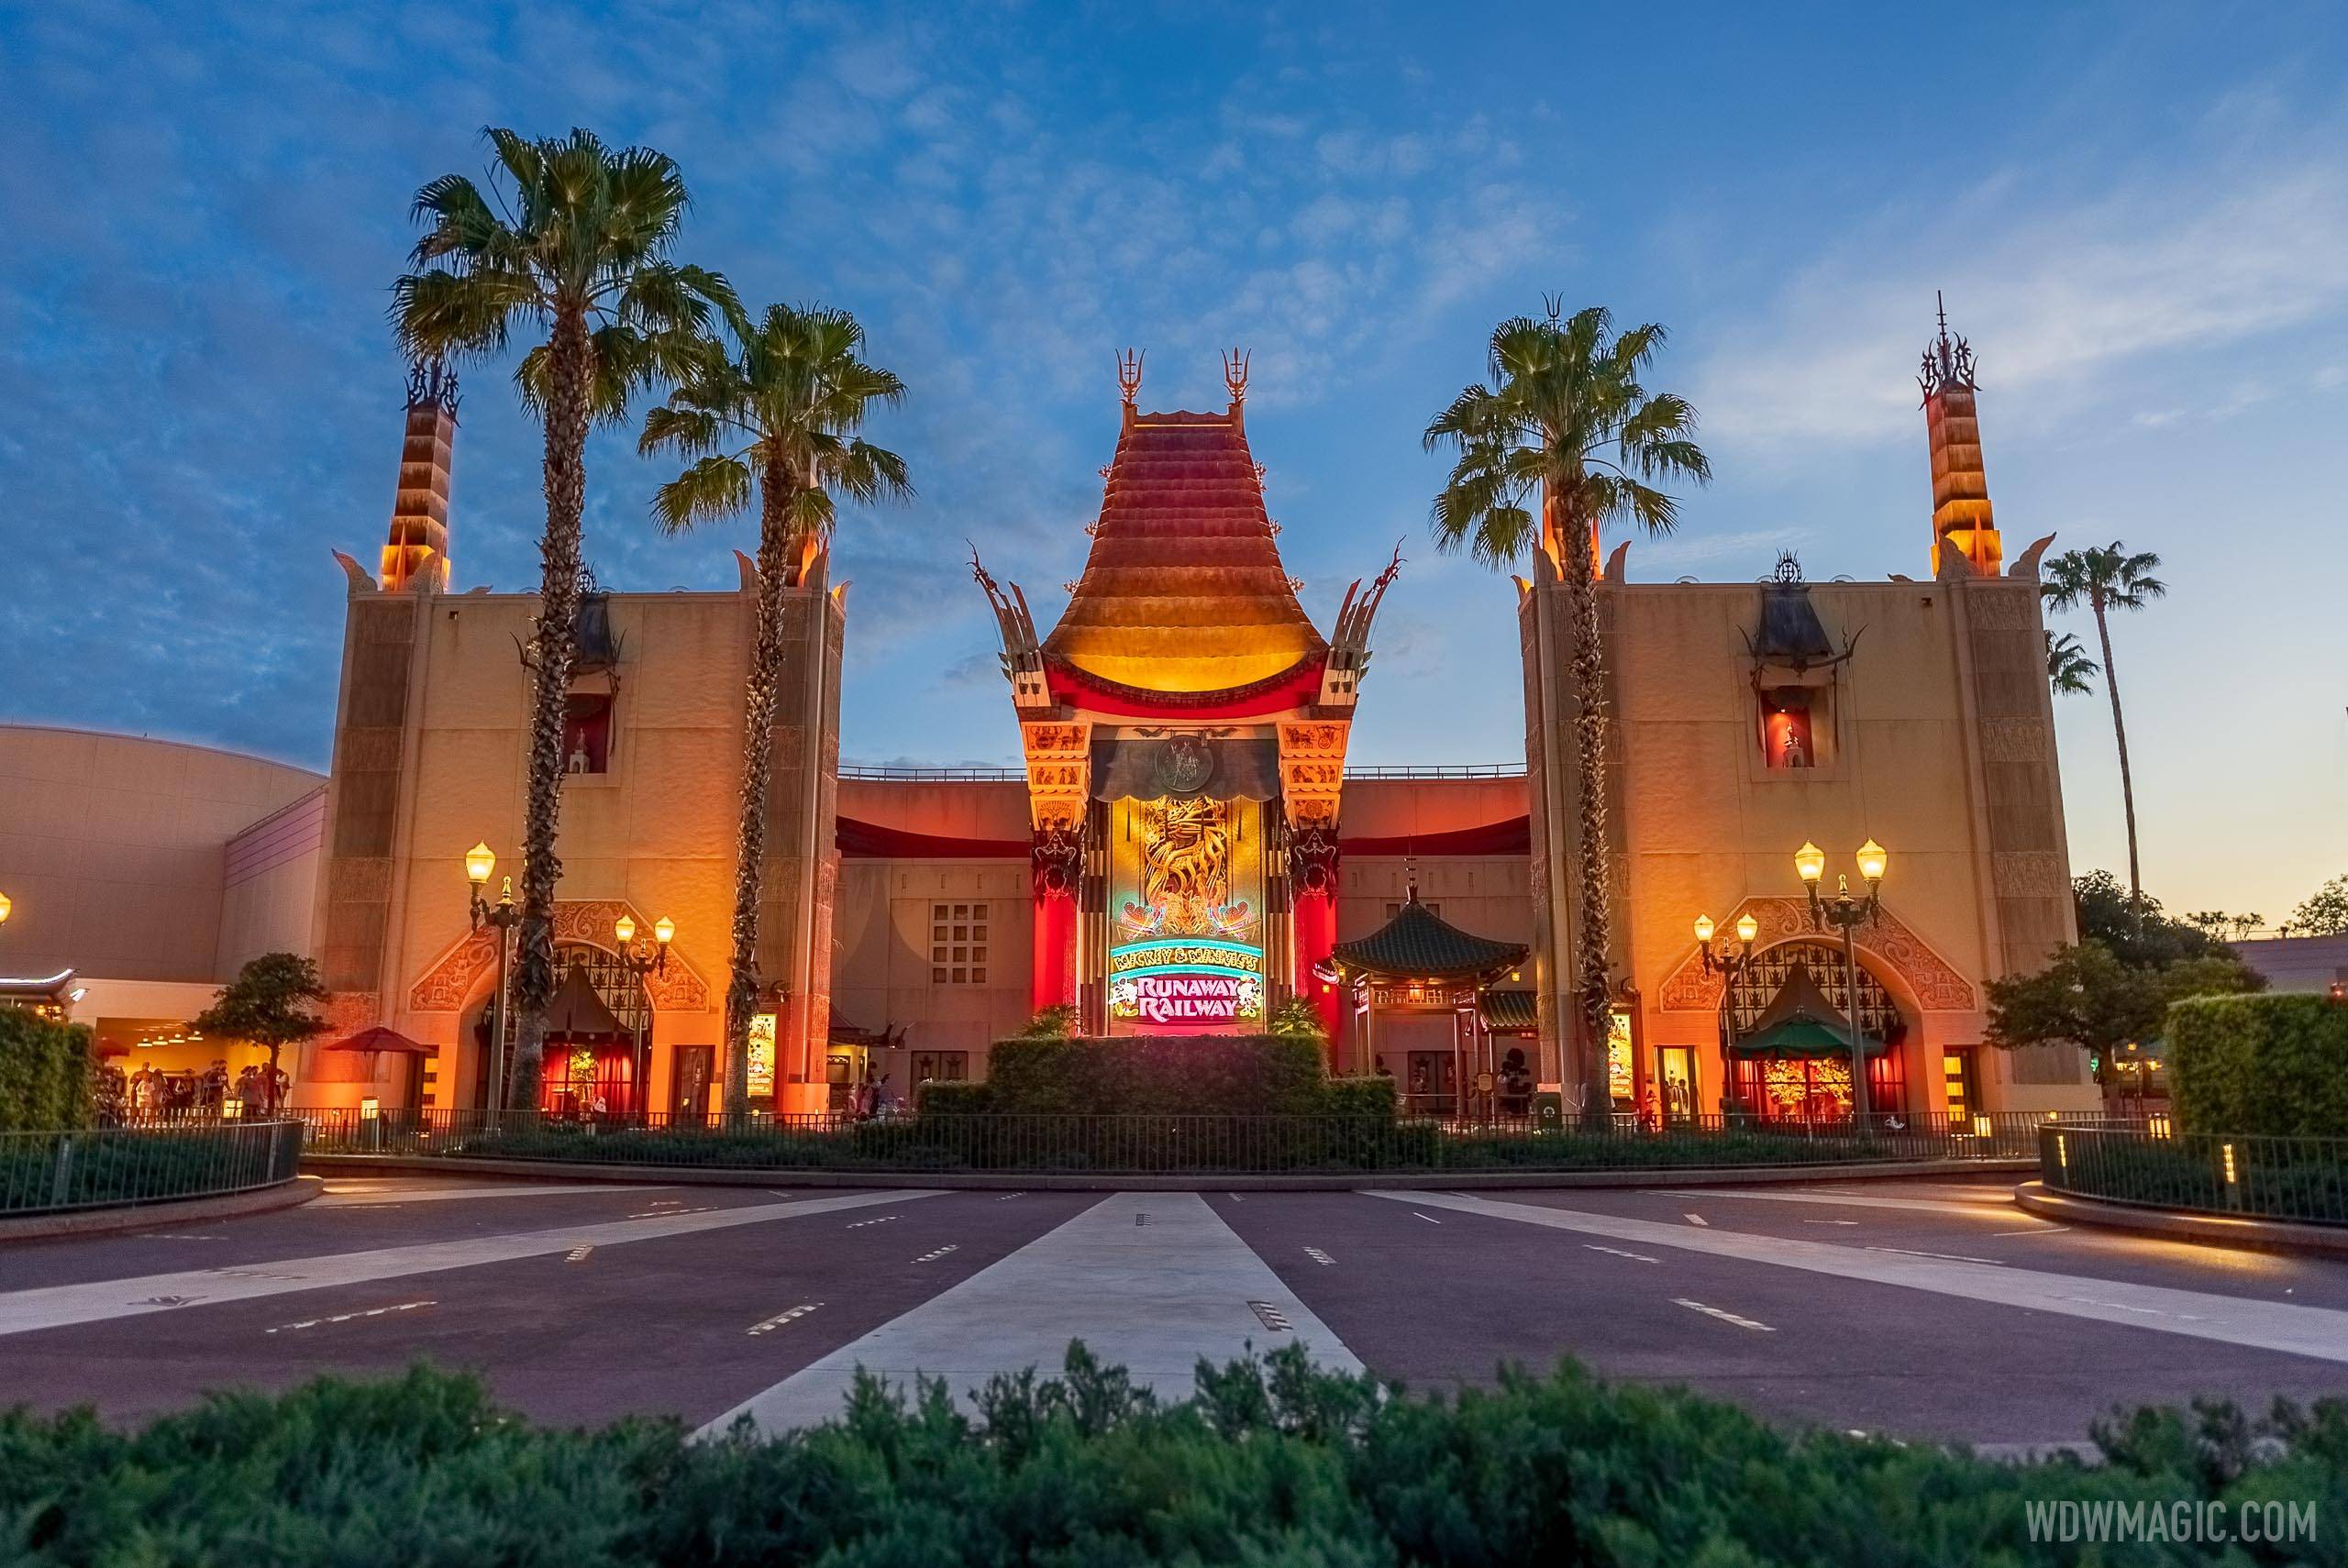 Disney's Hollywood Studios has gained an extra hour of operating time in August